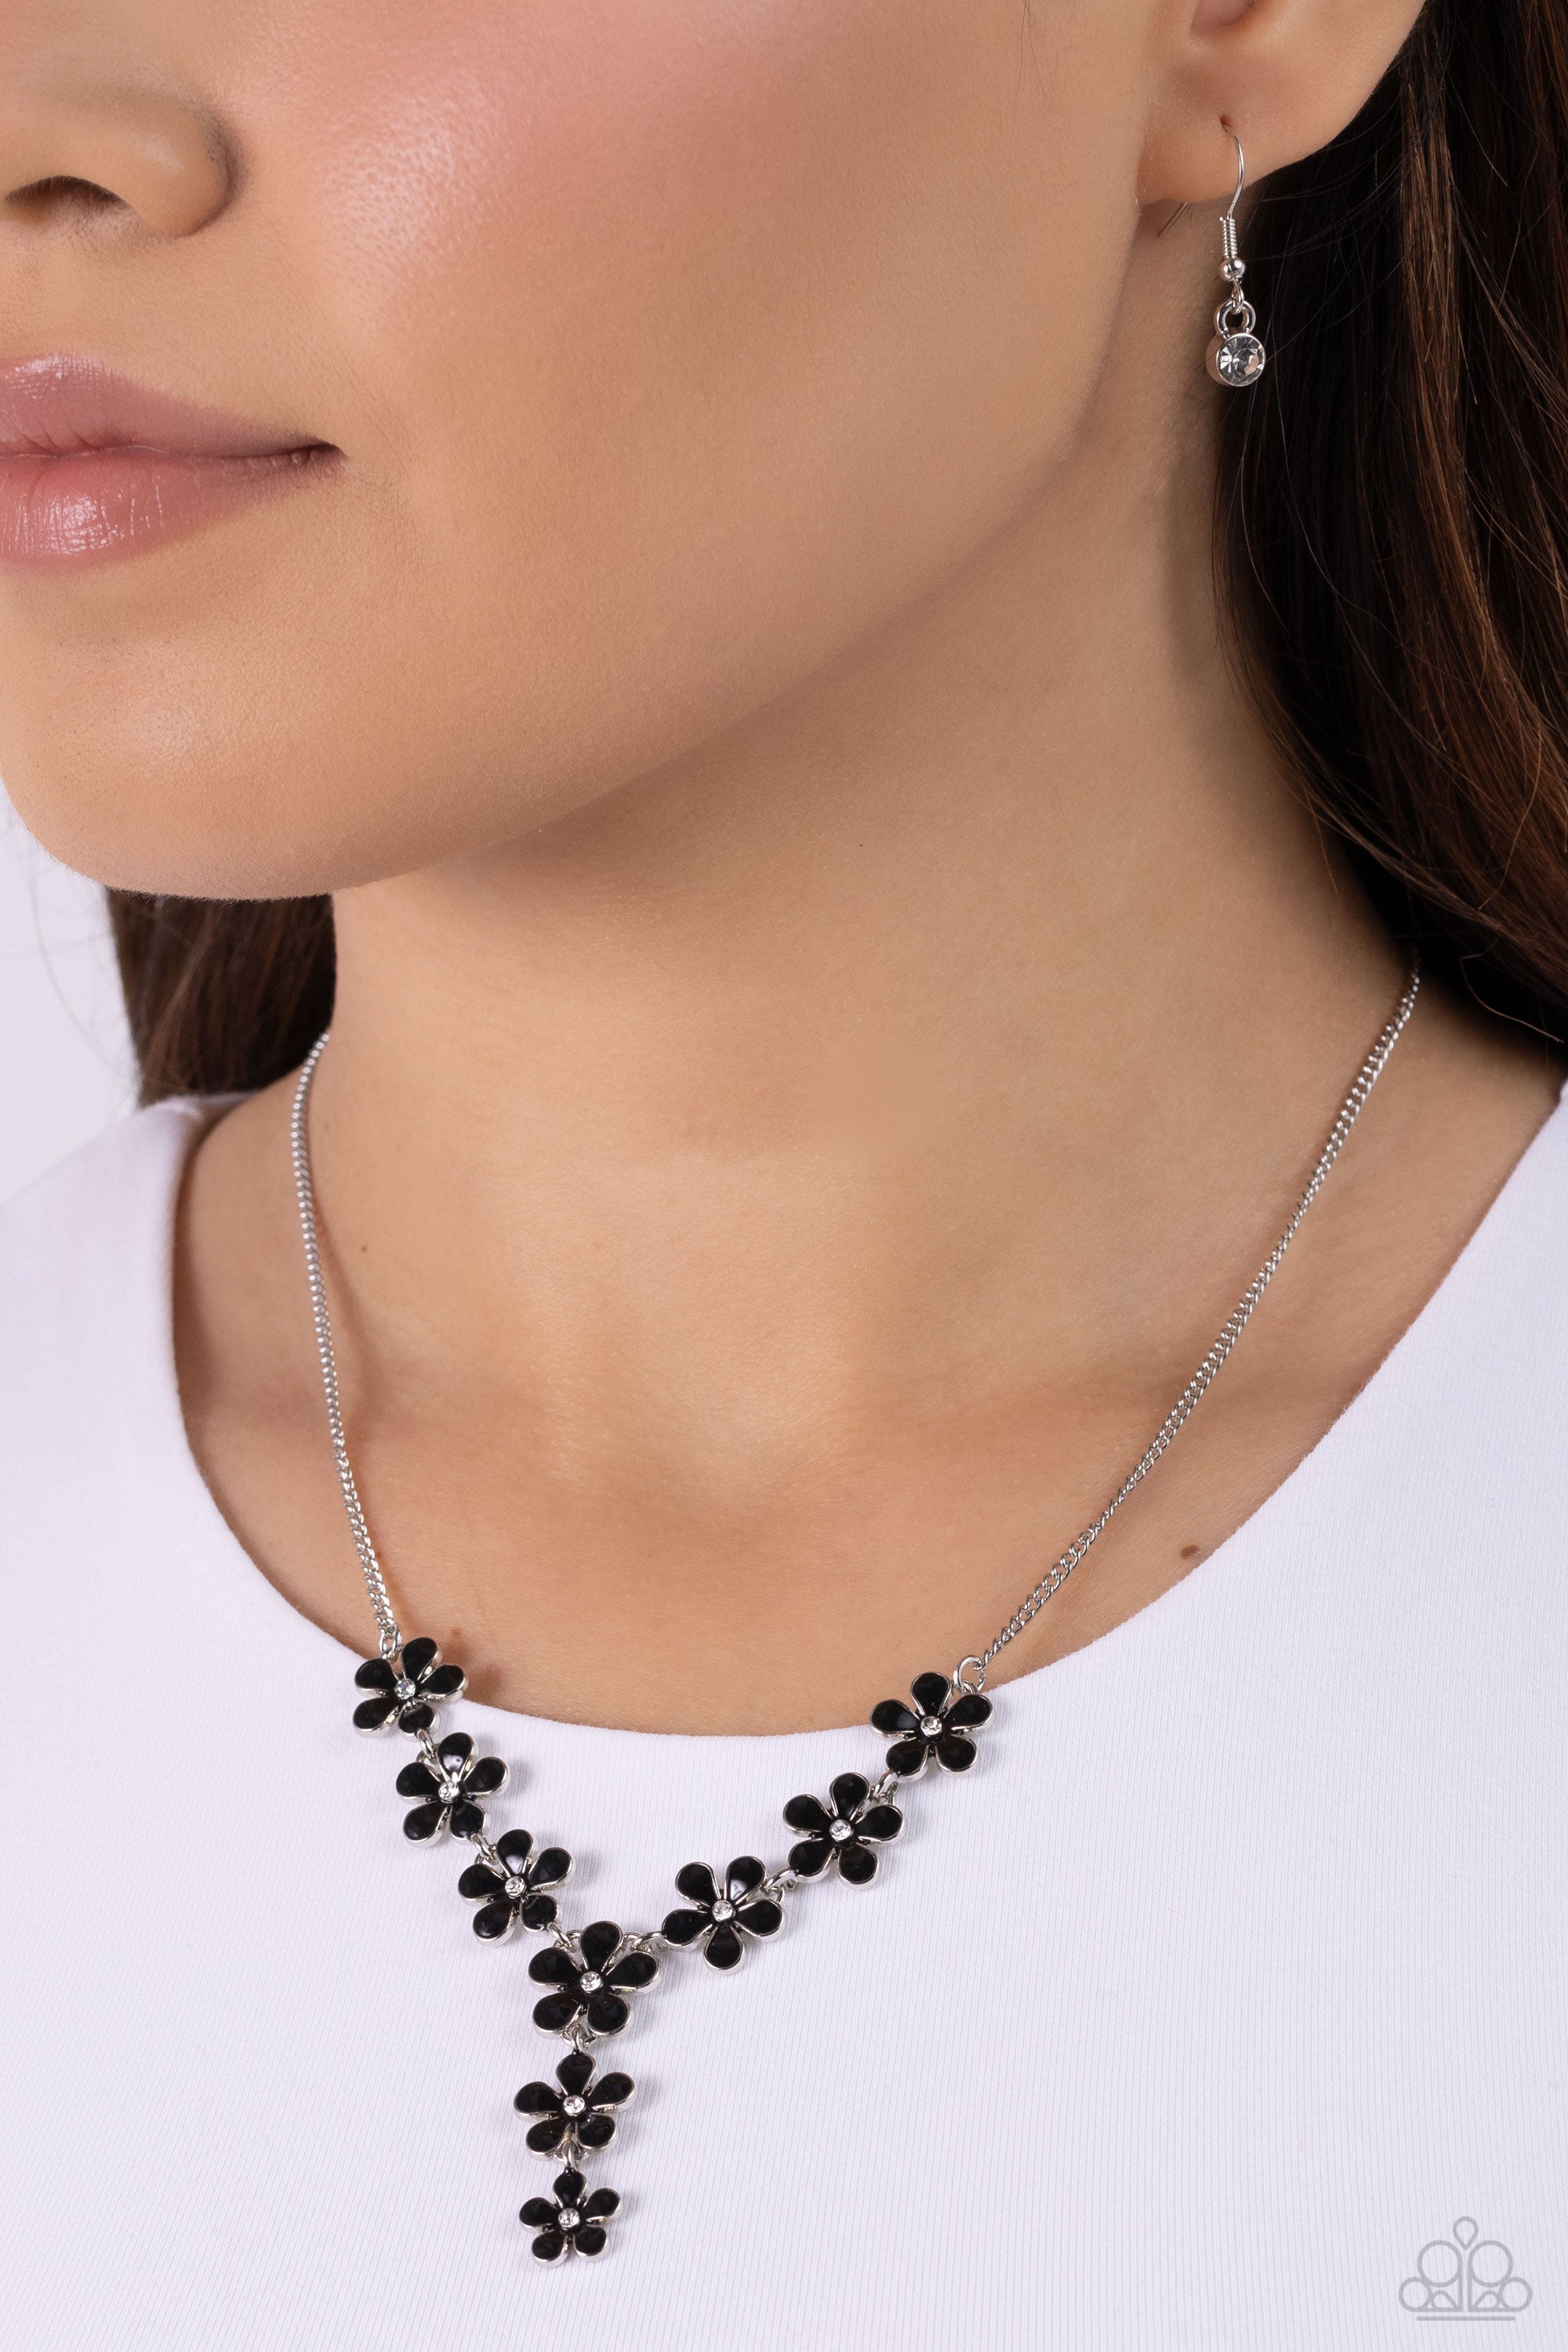 Flowering Feature Black Necklace - Paparazzi Accessories- lightbox - CarasShop.com - $5 Jewelry by Cara Jewels